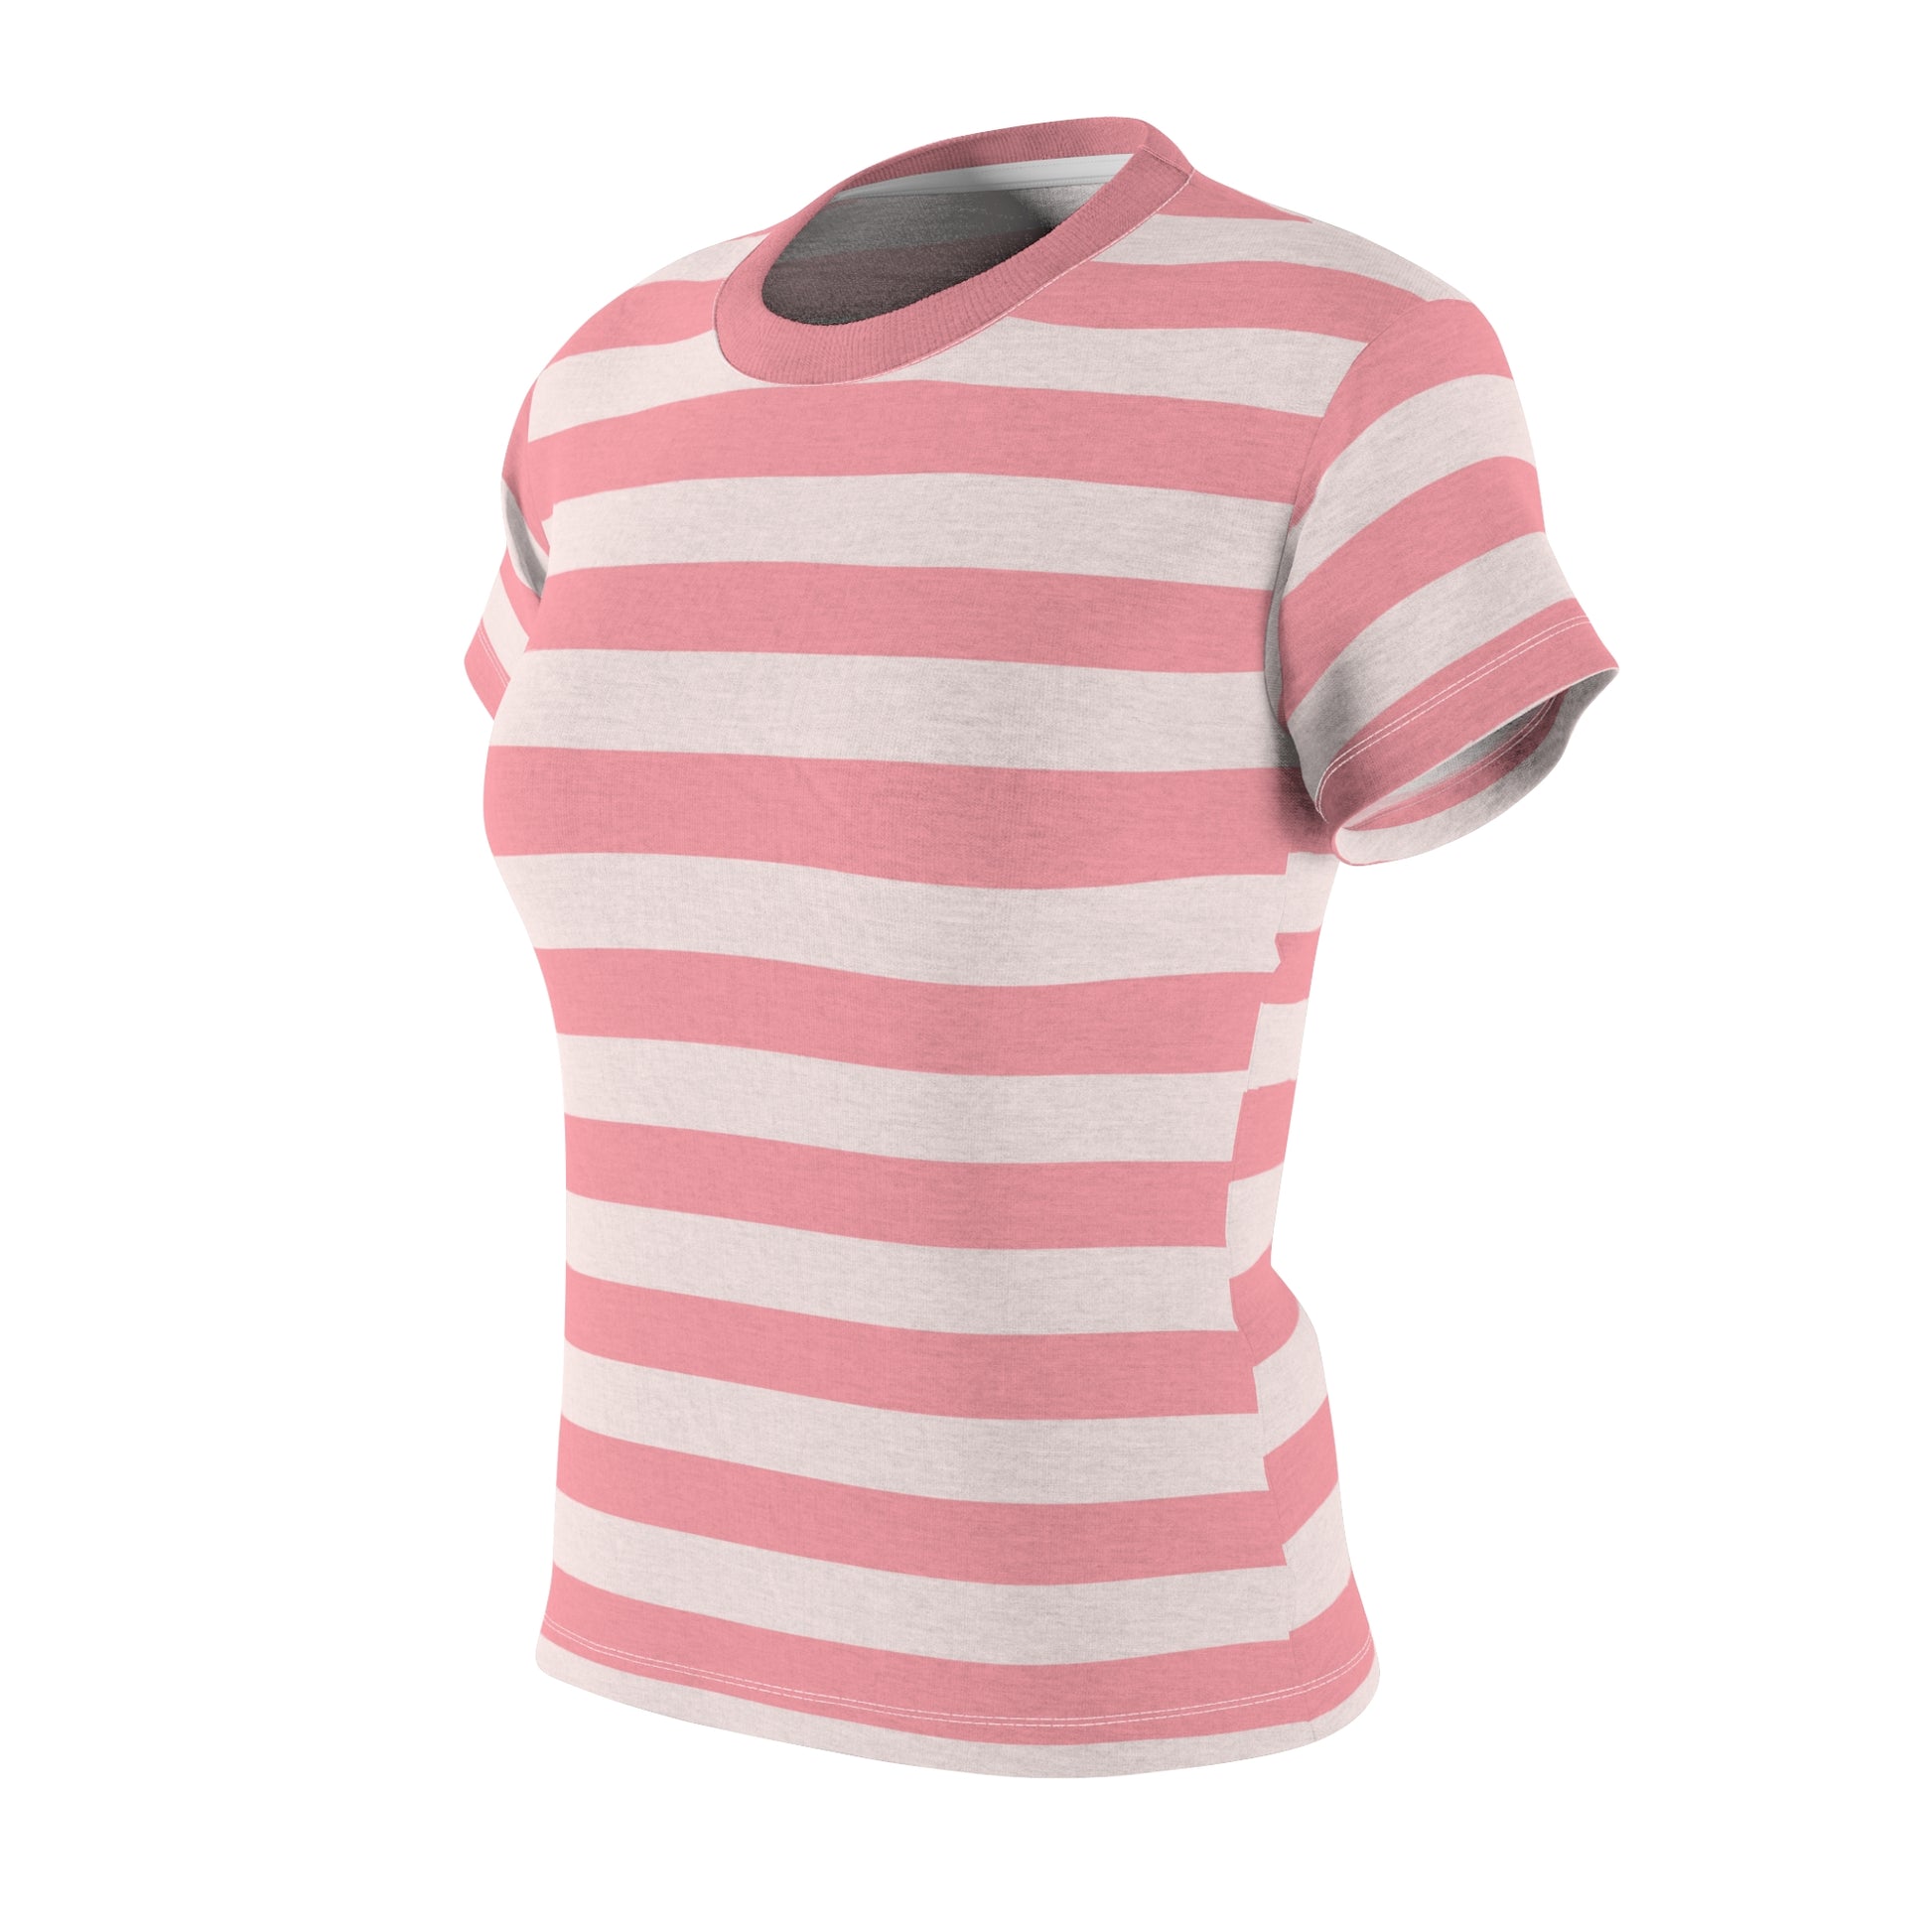 Pink and White Striped Women Tshirt, Ladies Vintage Retro Designer Adult Female Aesthetic Fashion Fitted Crewneck Tee Shirt Top Starcove Fashion